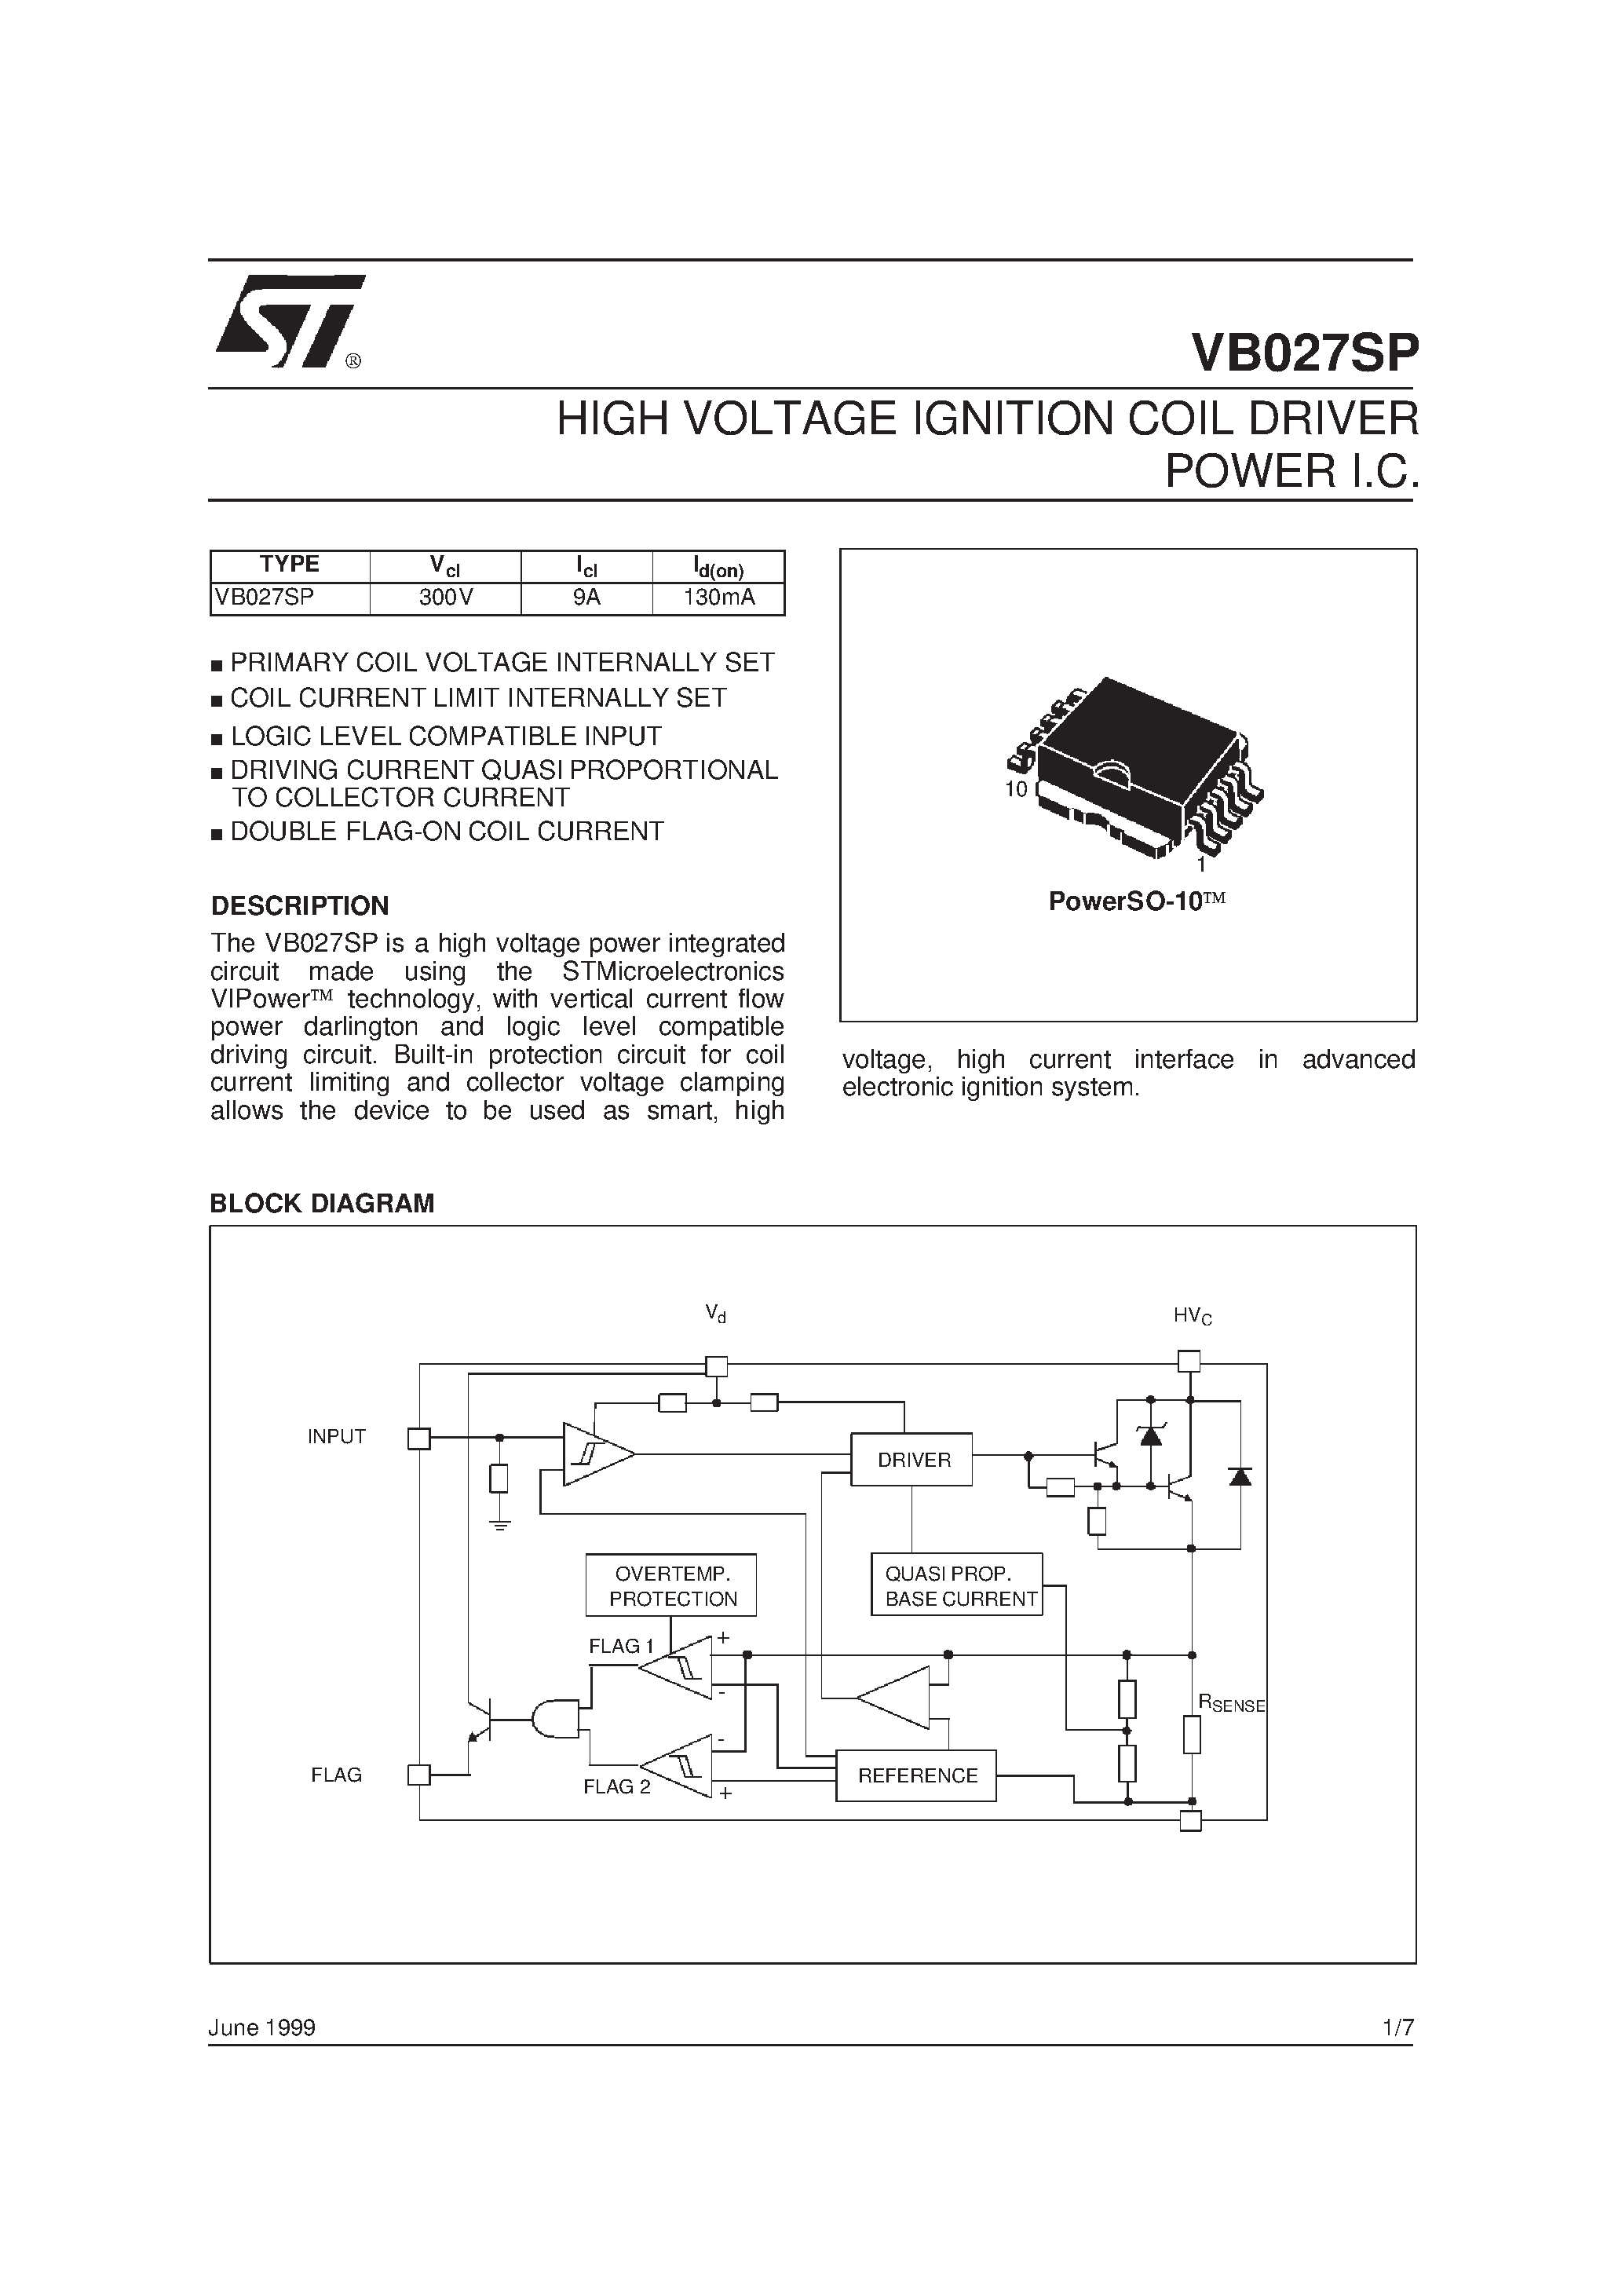 Datasheet VB027SP - HIGH VOLTAGE IGNITION COIL DRIVER POWER I.C. page 1